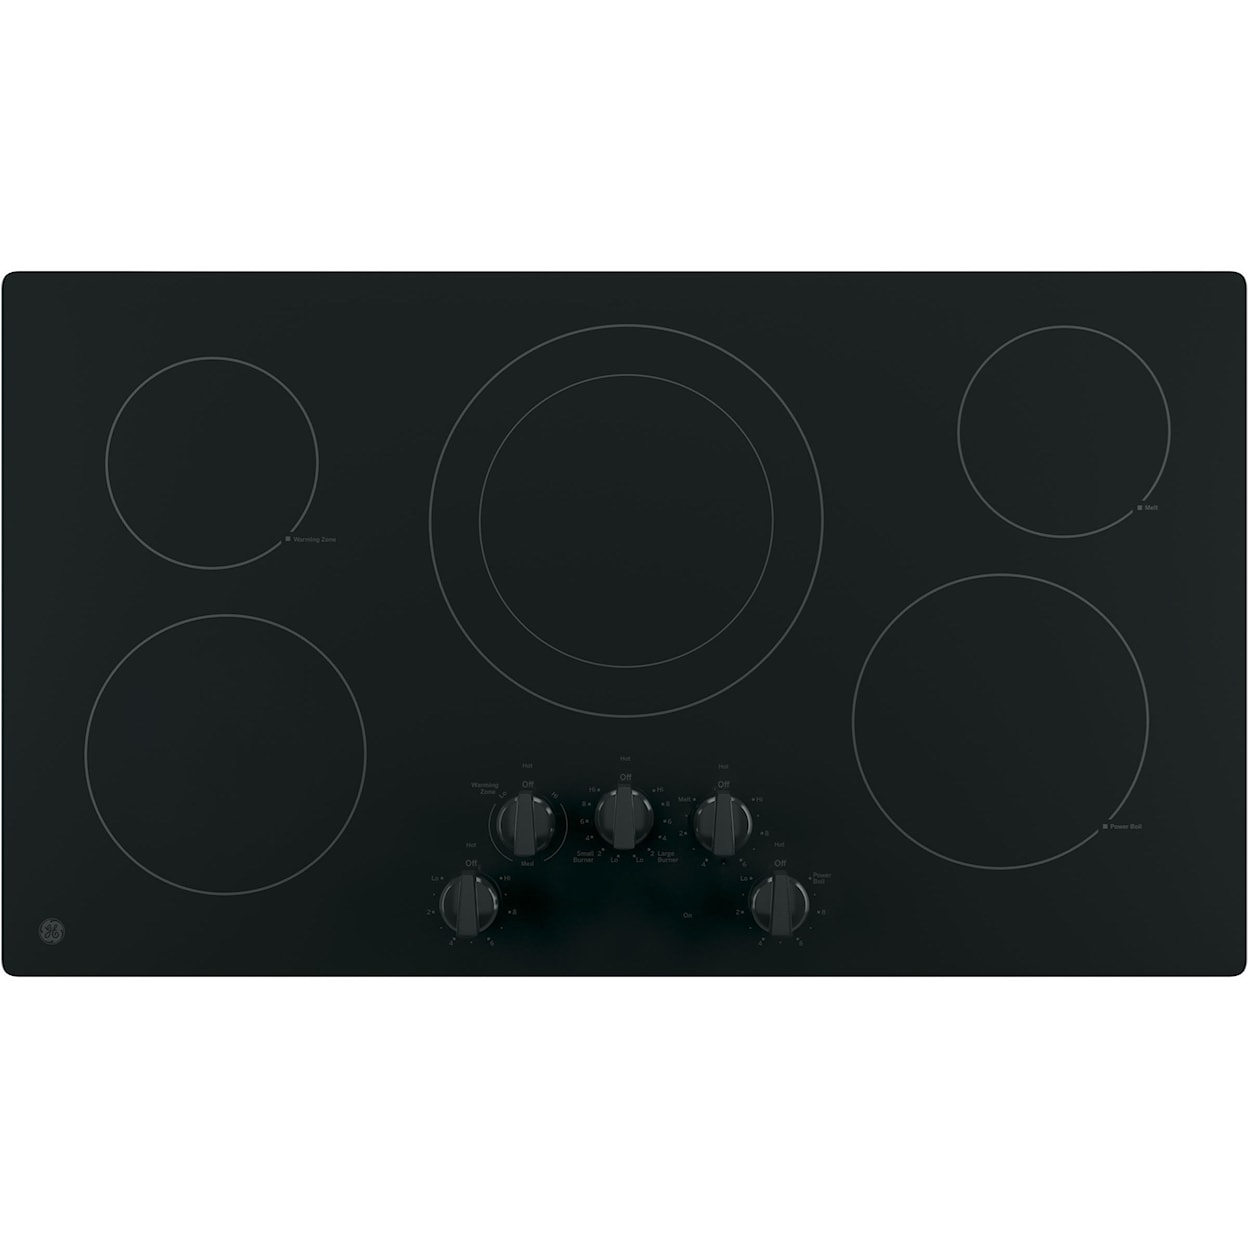 GE Appliances GE Electric Cooktops 36" Built-In Knob Control Electric Cooktop